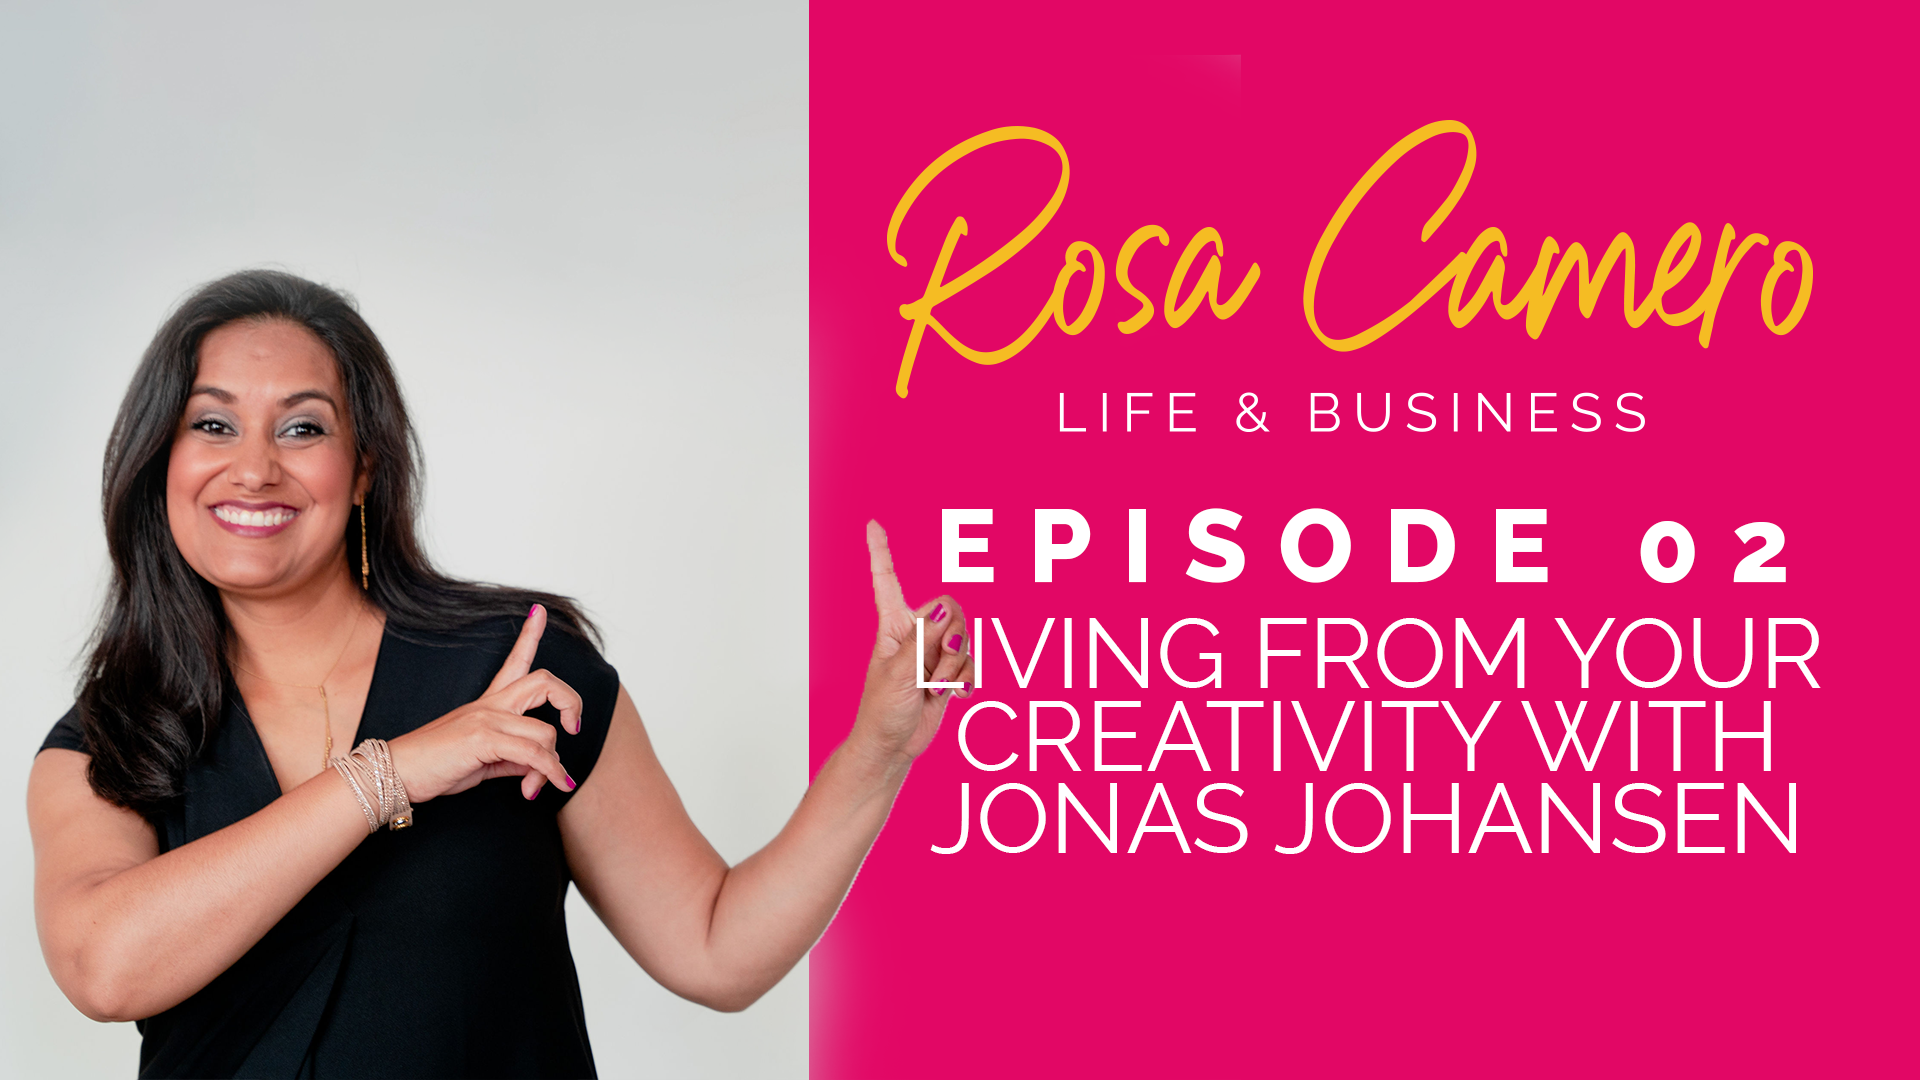 You are currently viewing Life & Business by Rosa Camero  Episode 02: Living from your creativity with Jonas Johansen